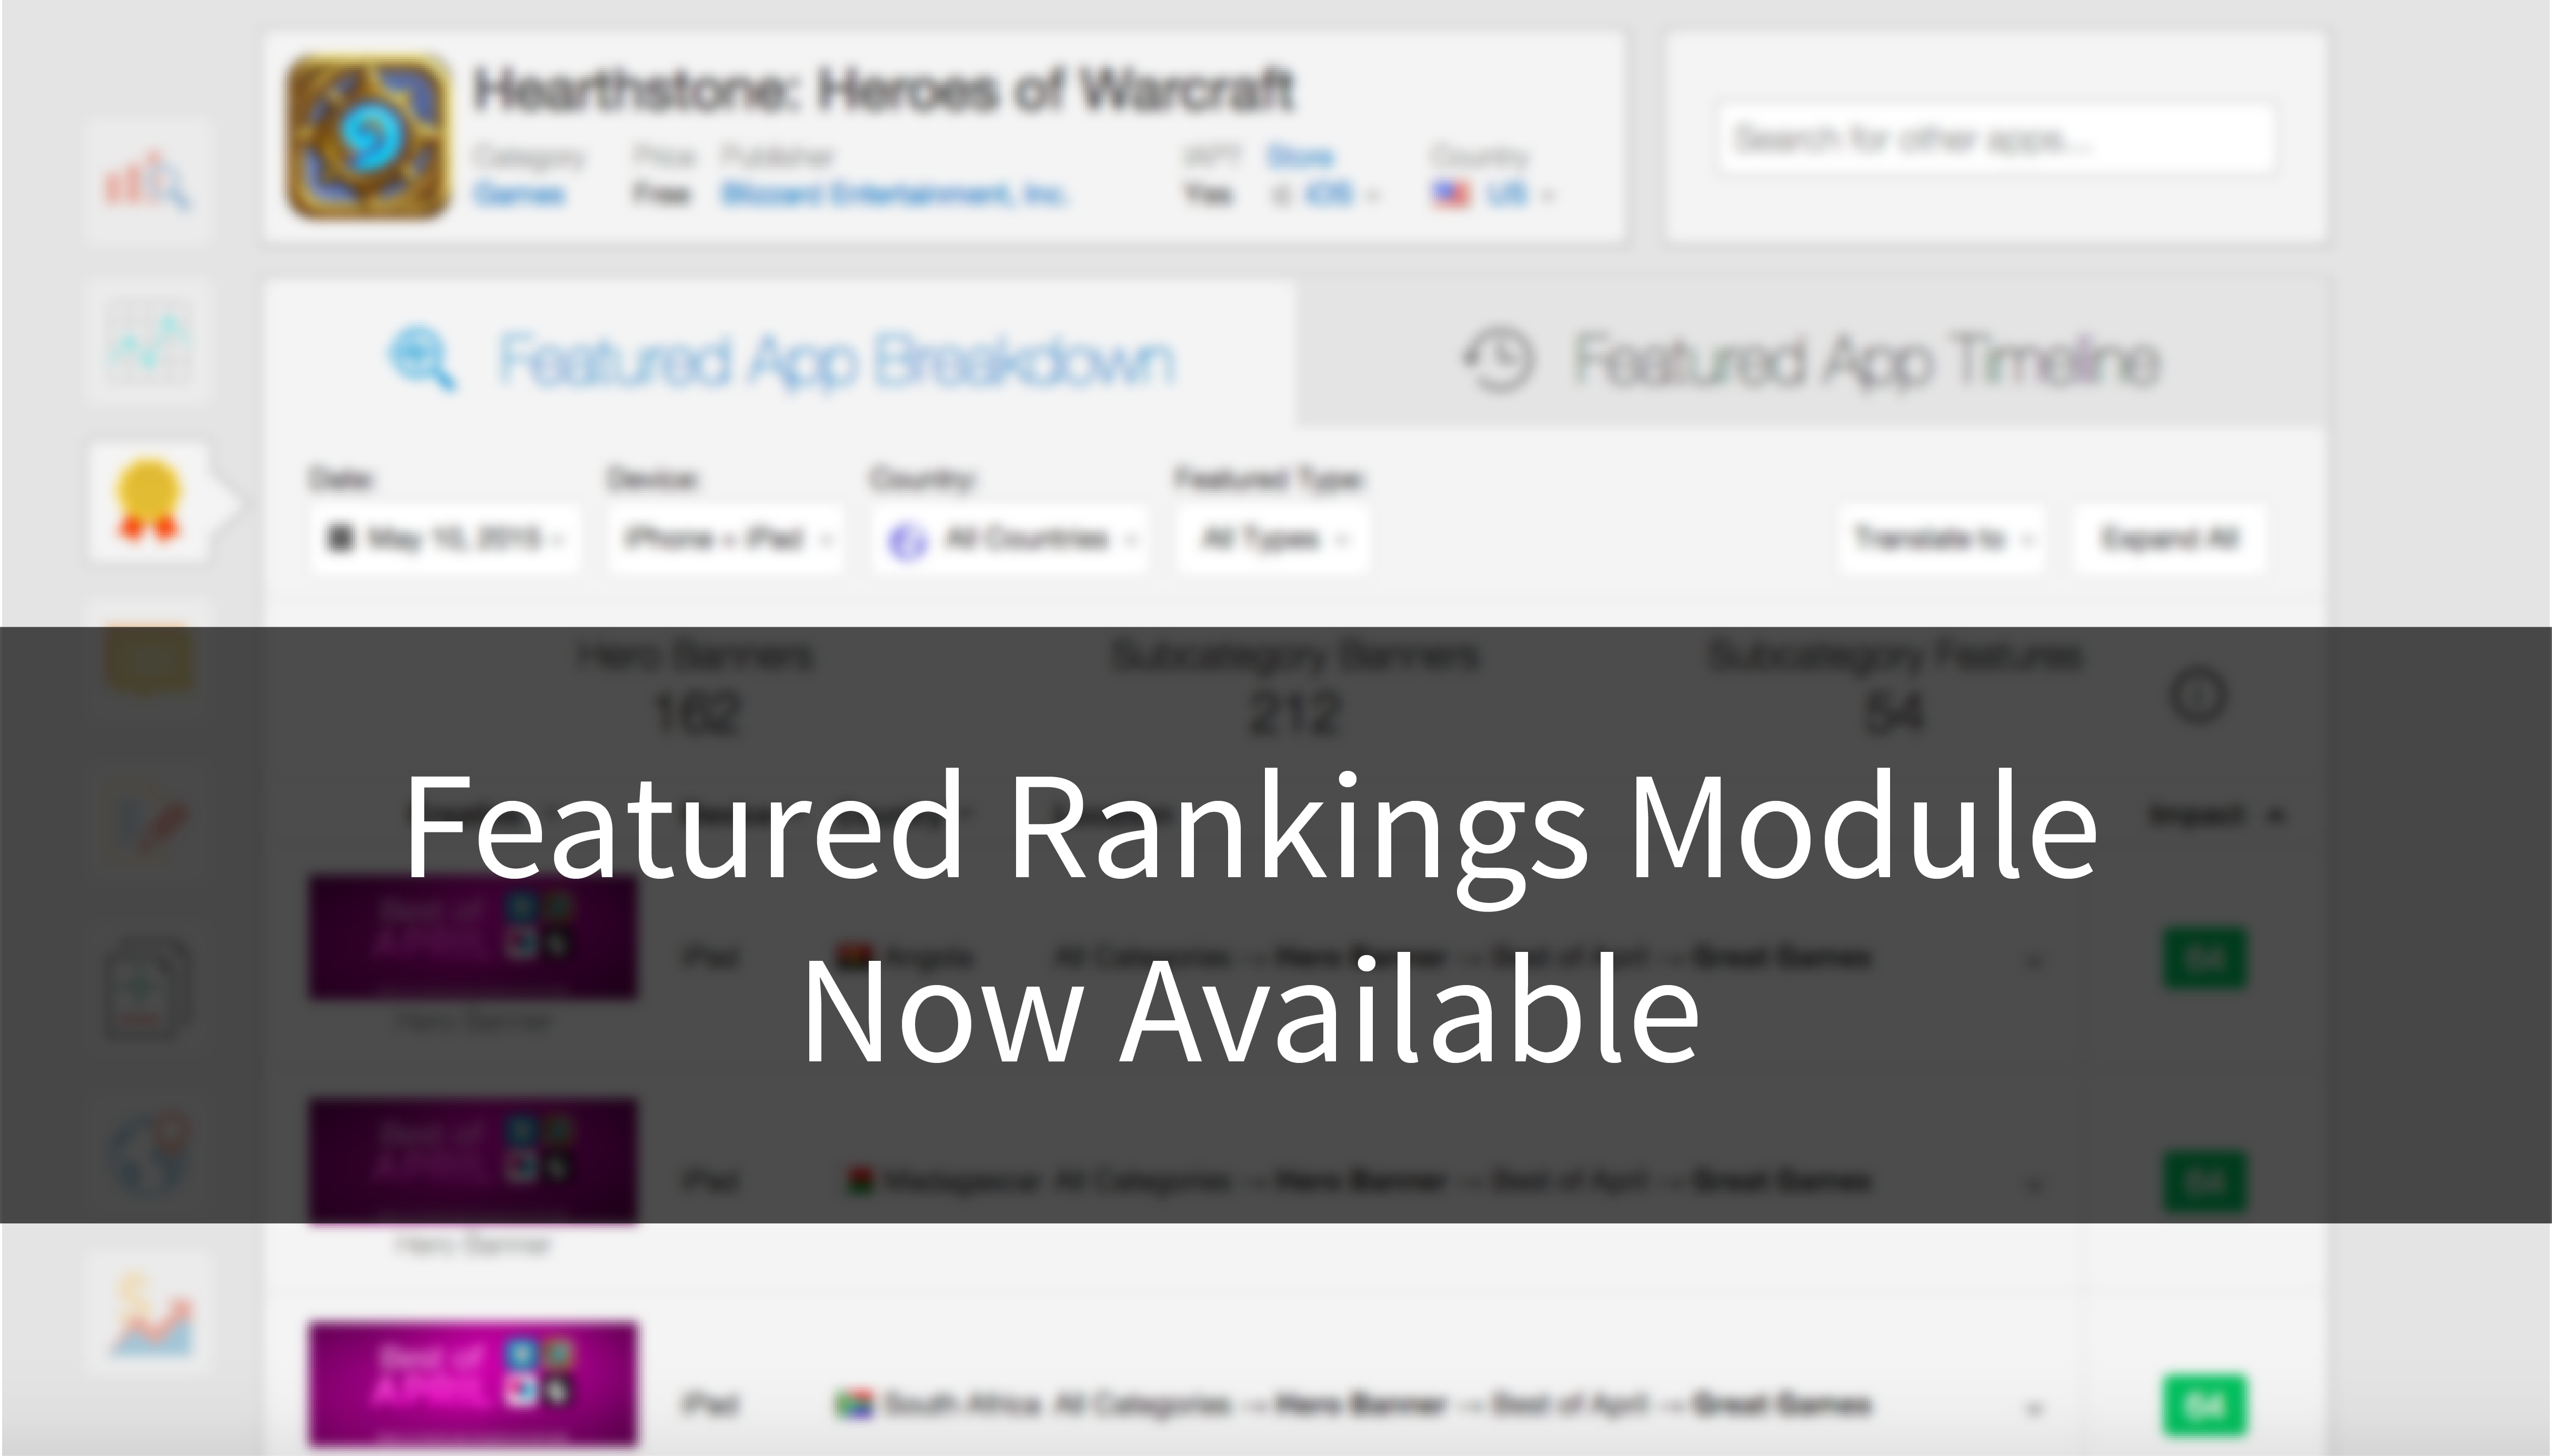 lt="Featured Rankings Module Now Available